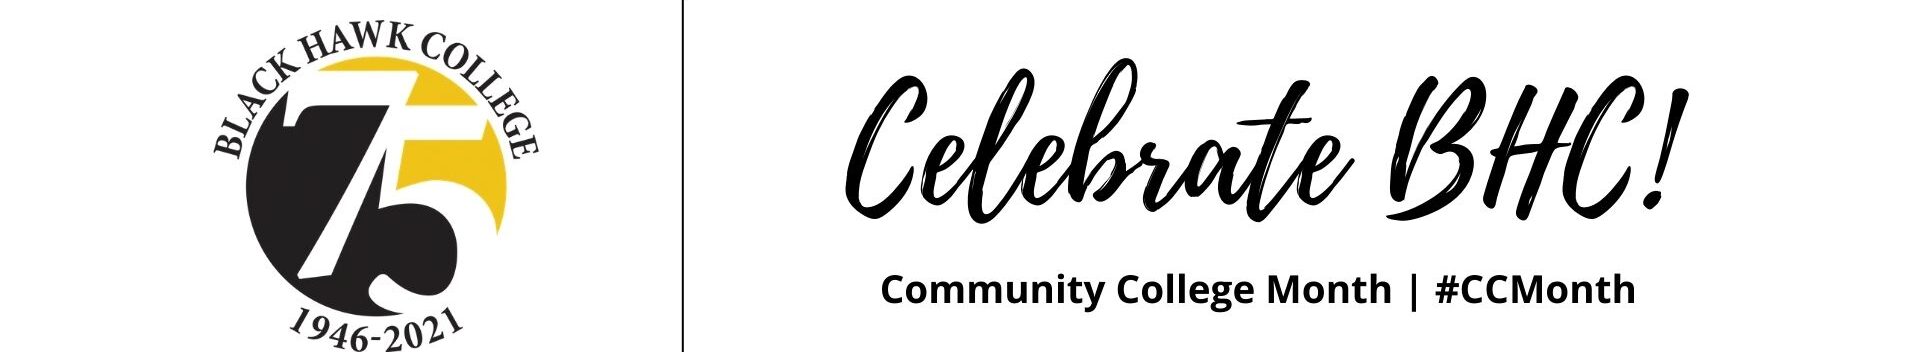 Celebrate BHC during Community College Month